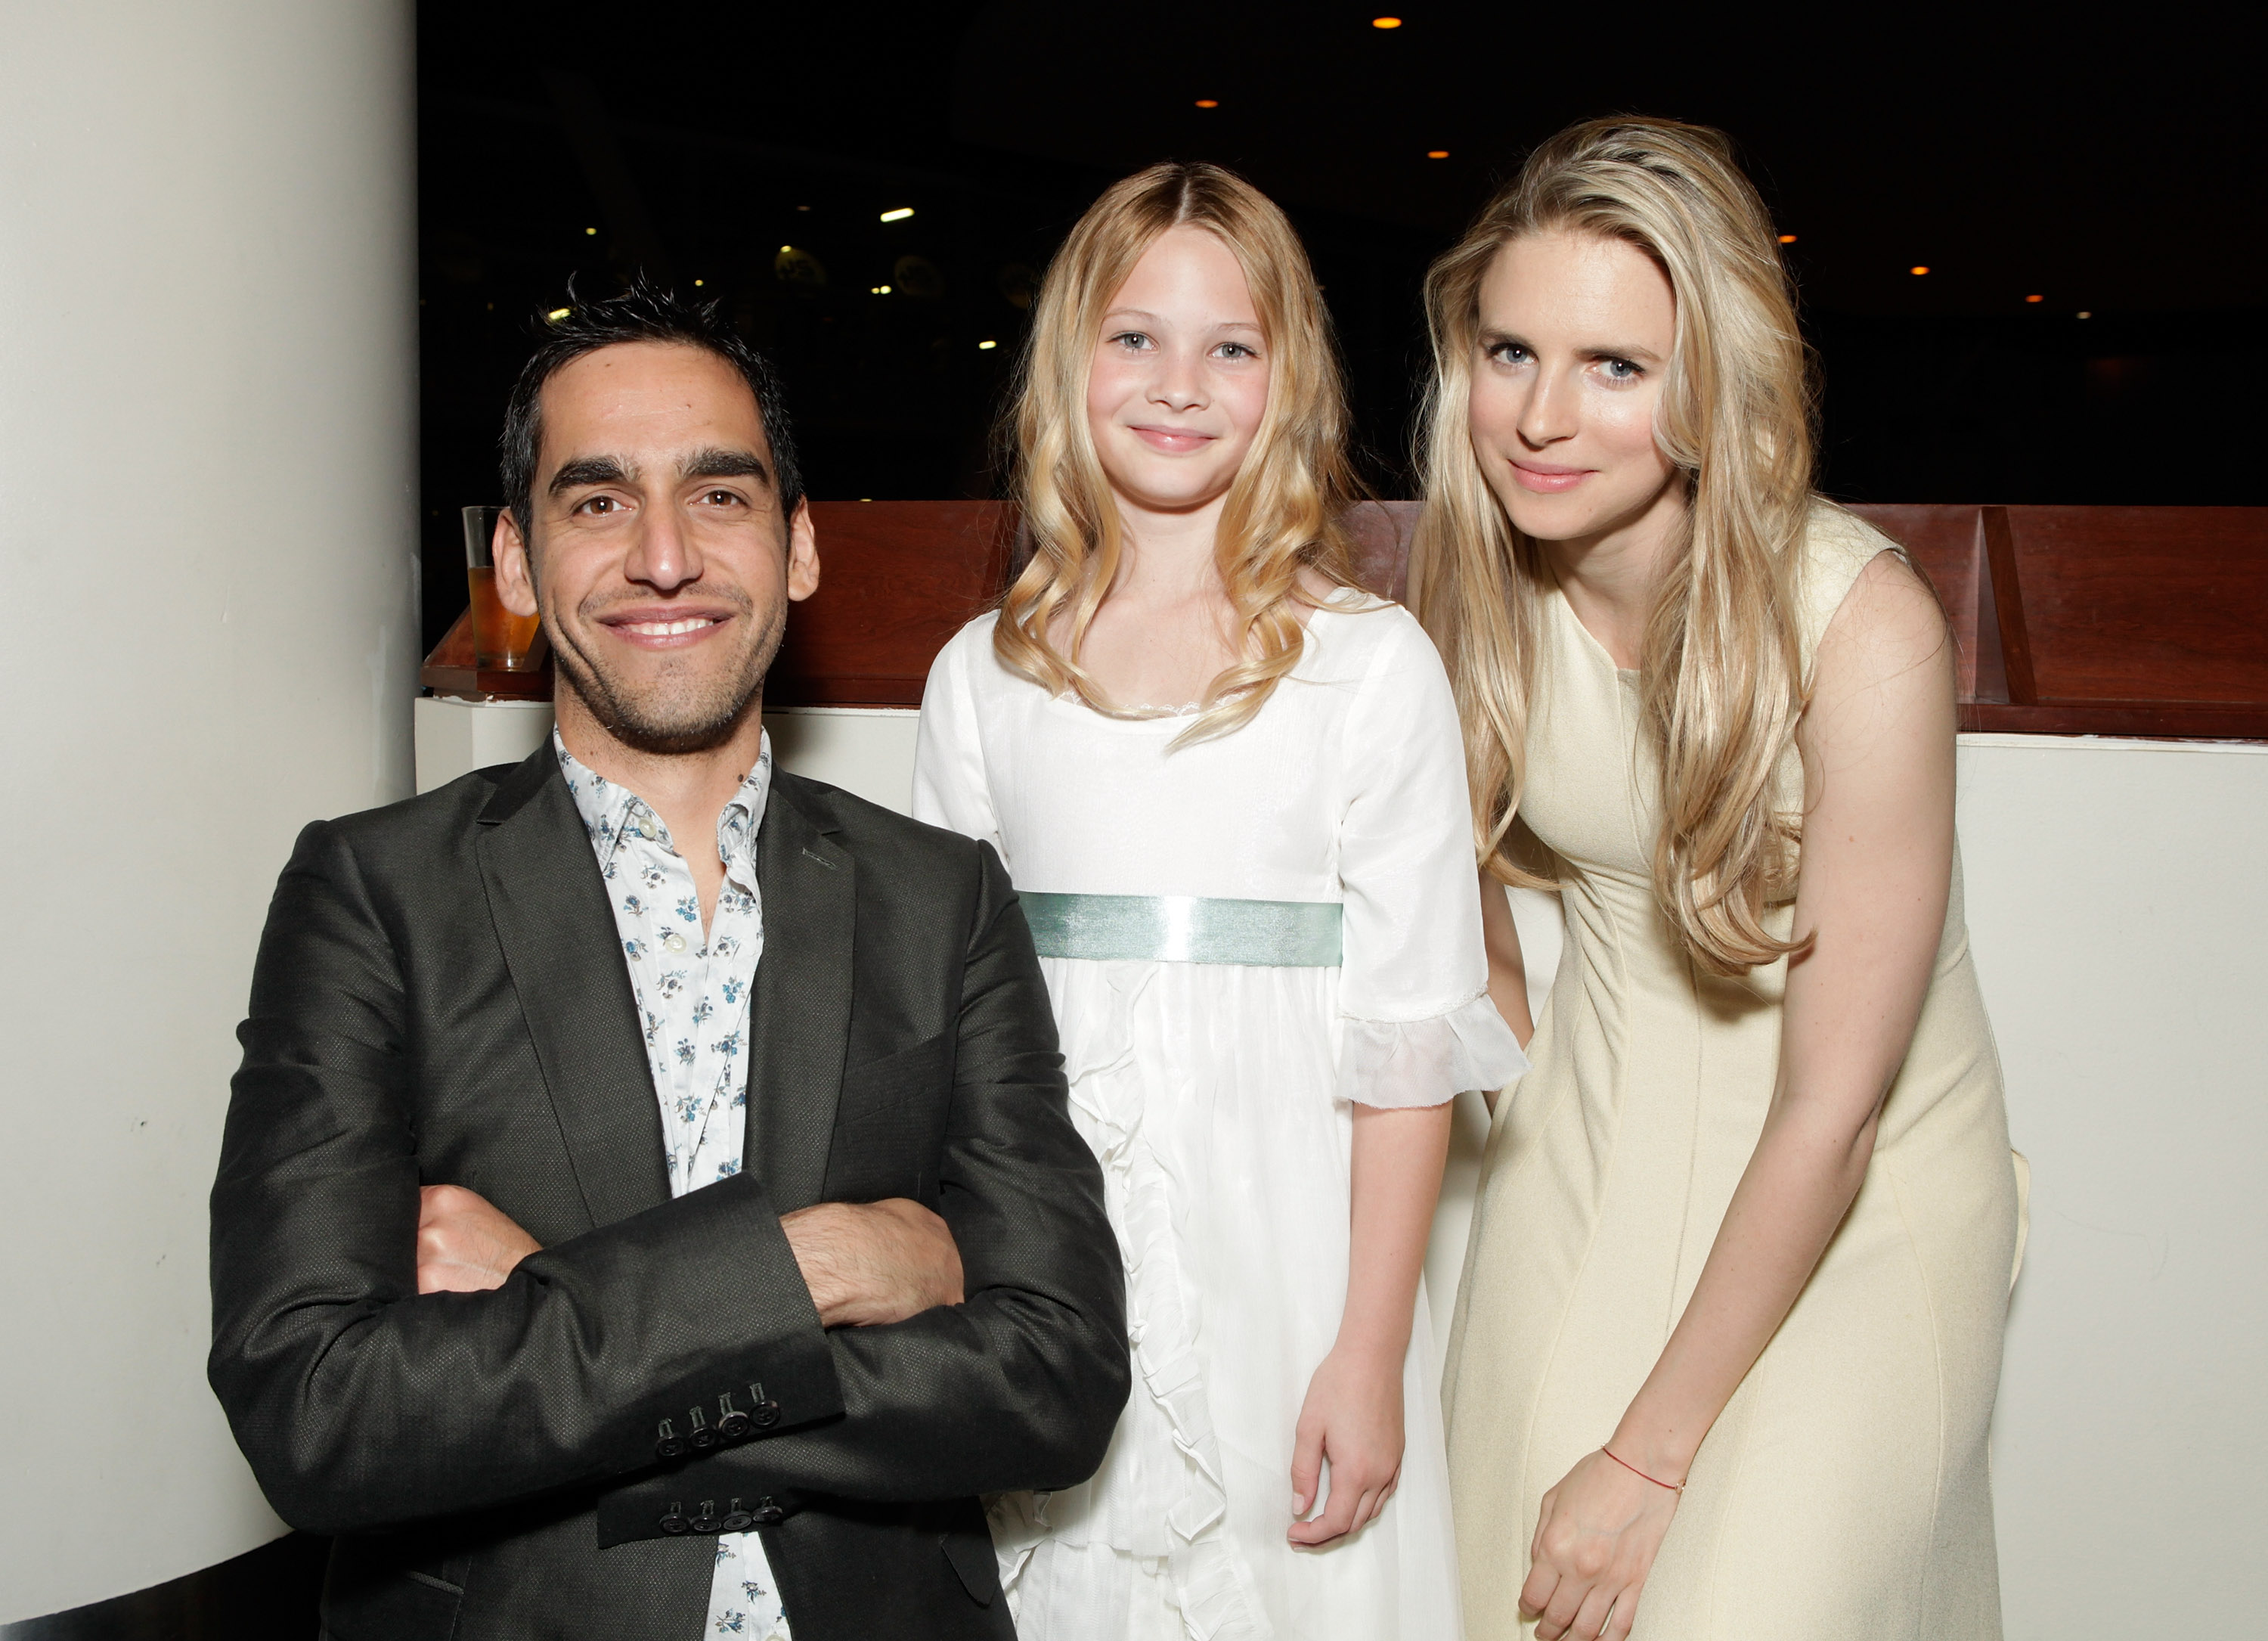 Zal Batmanglij, Avery Pohl and Brit Marling at Sound Of My Voice Gilt City Screening